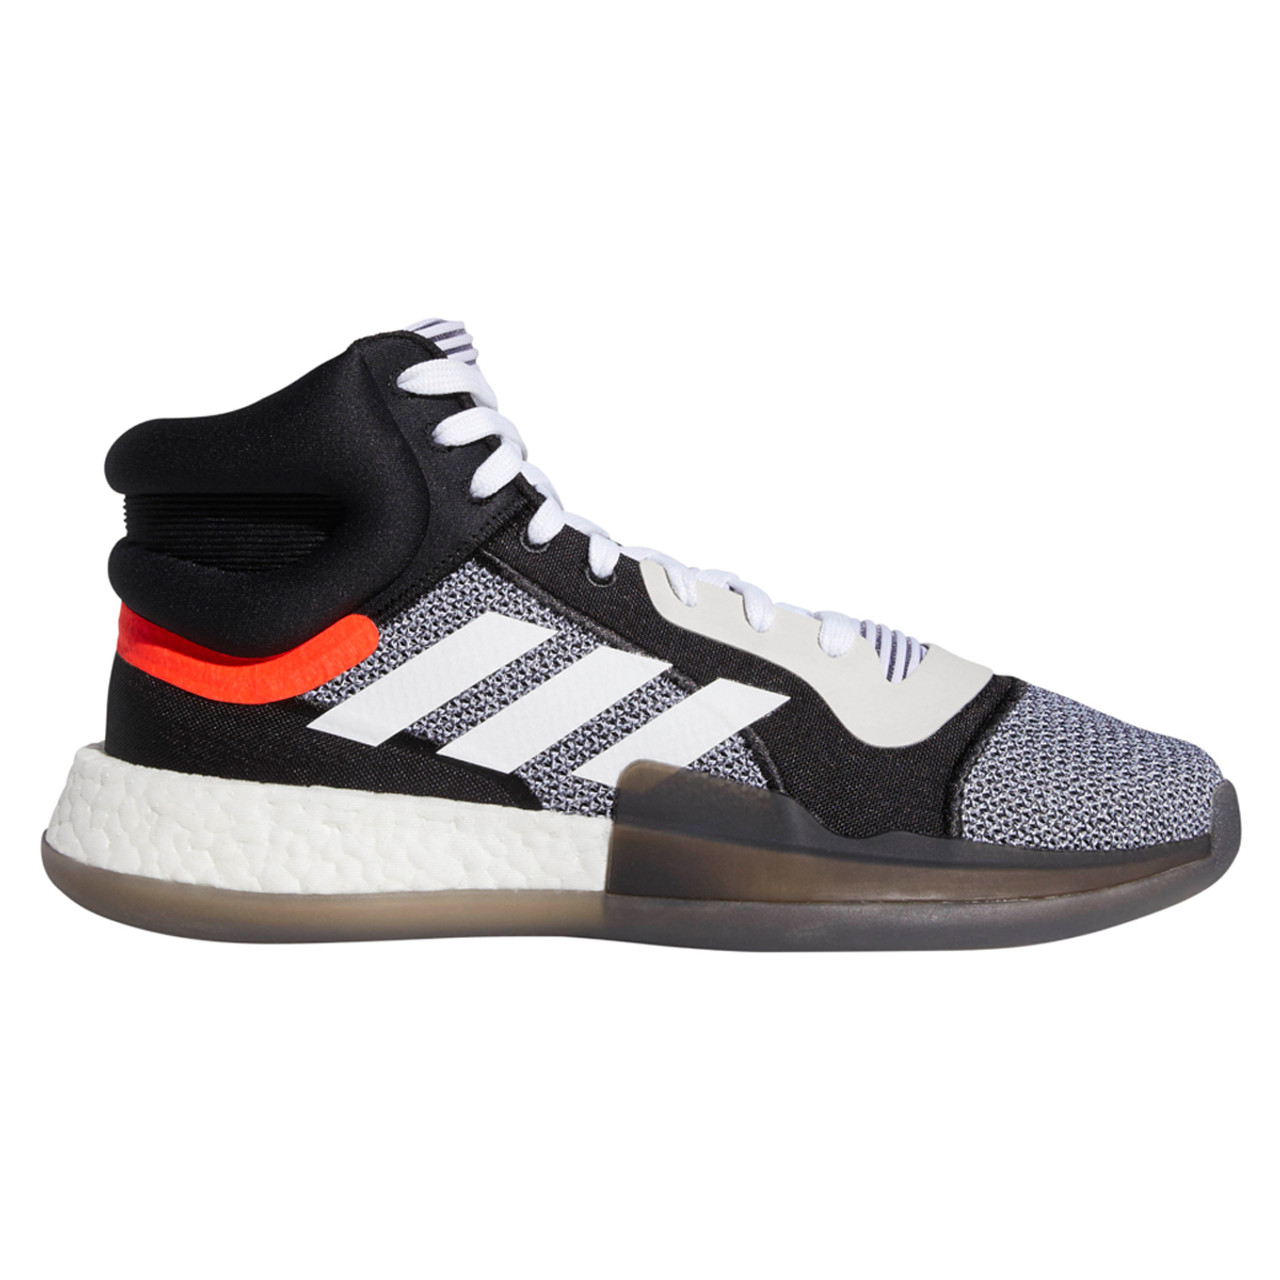 adidas forum low refined sneakers